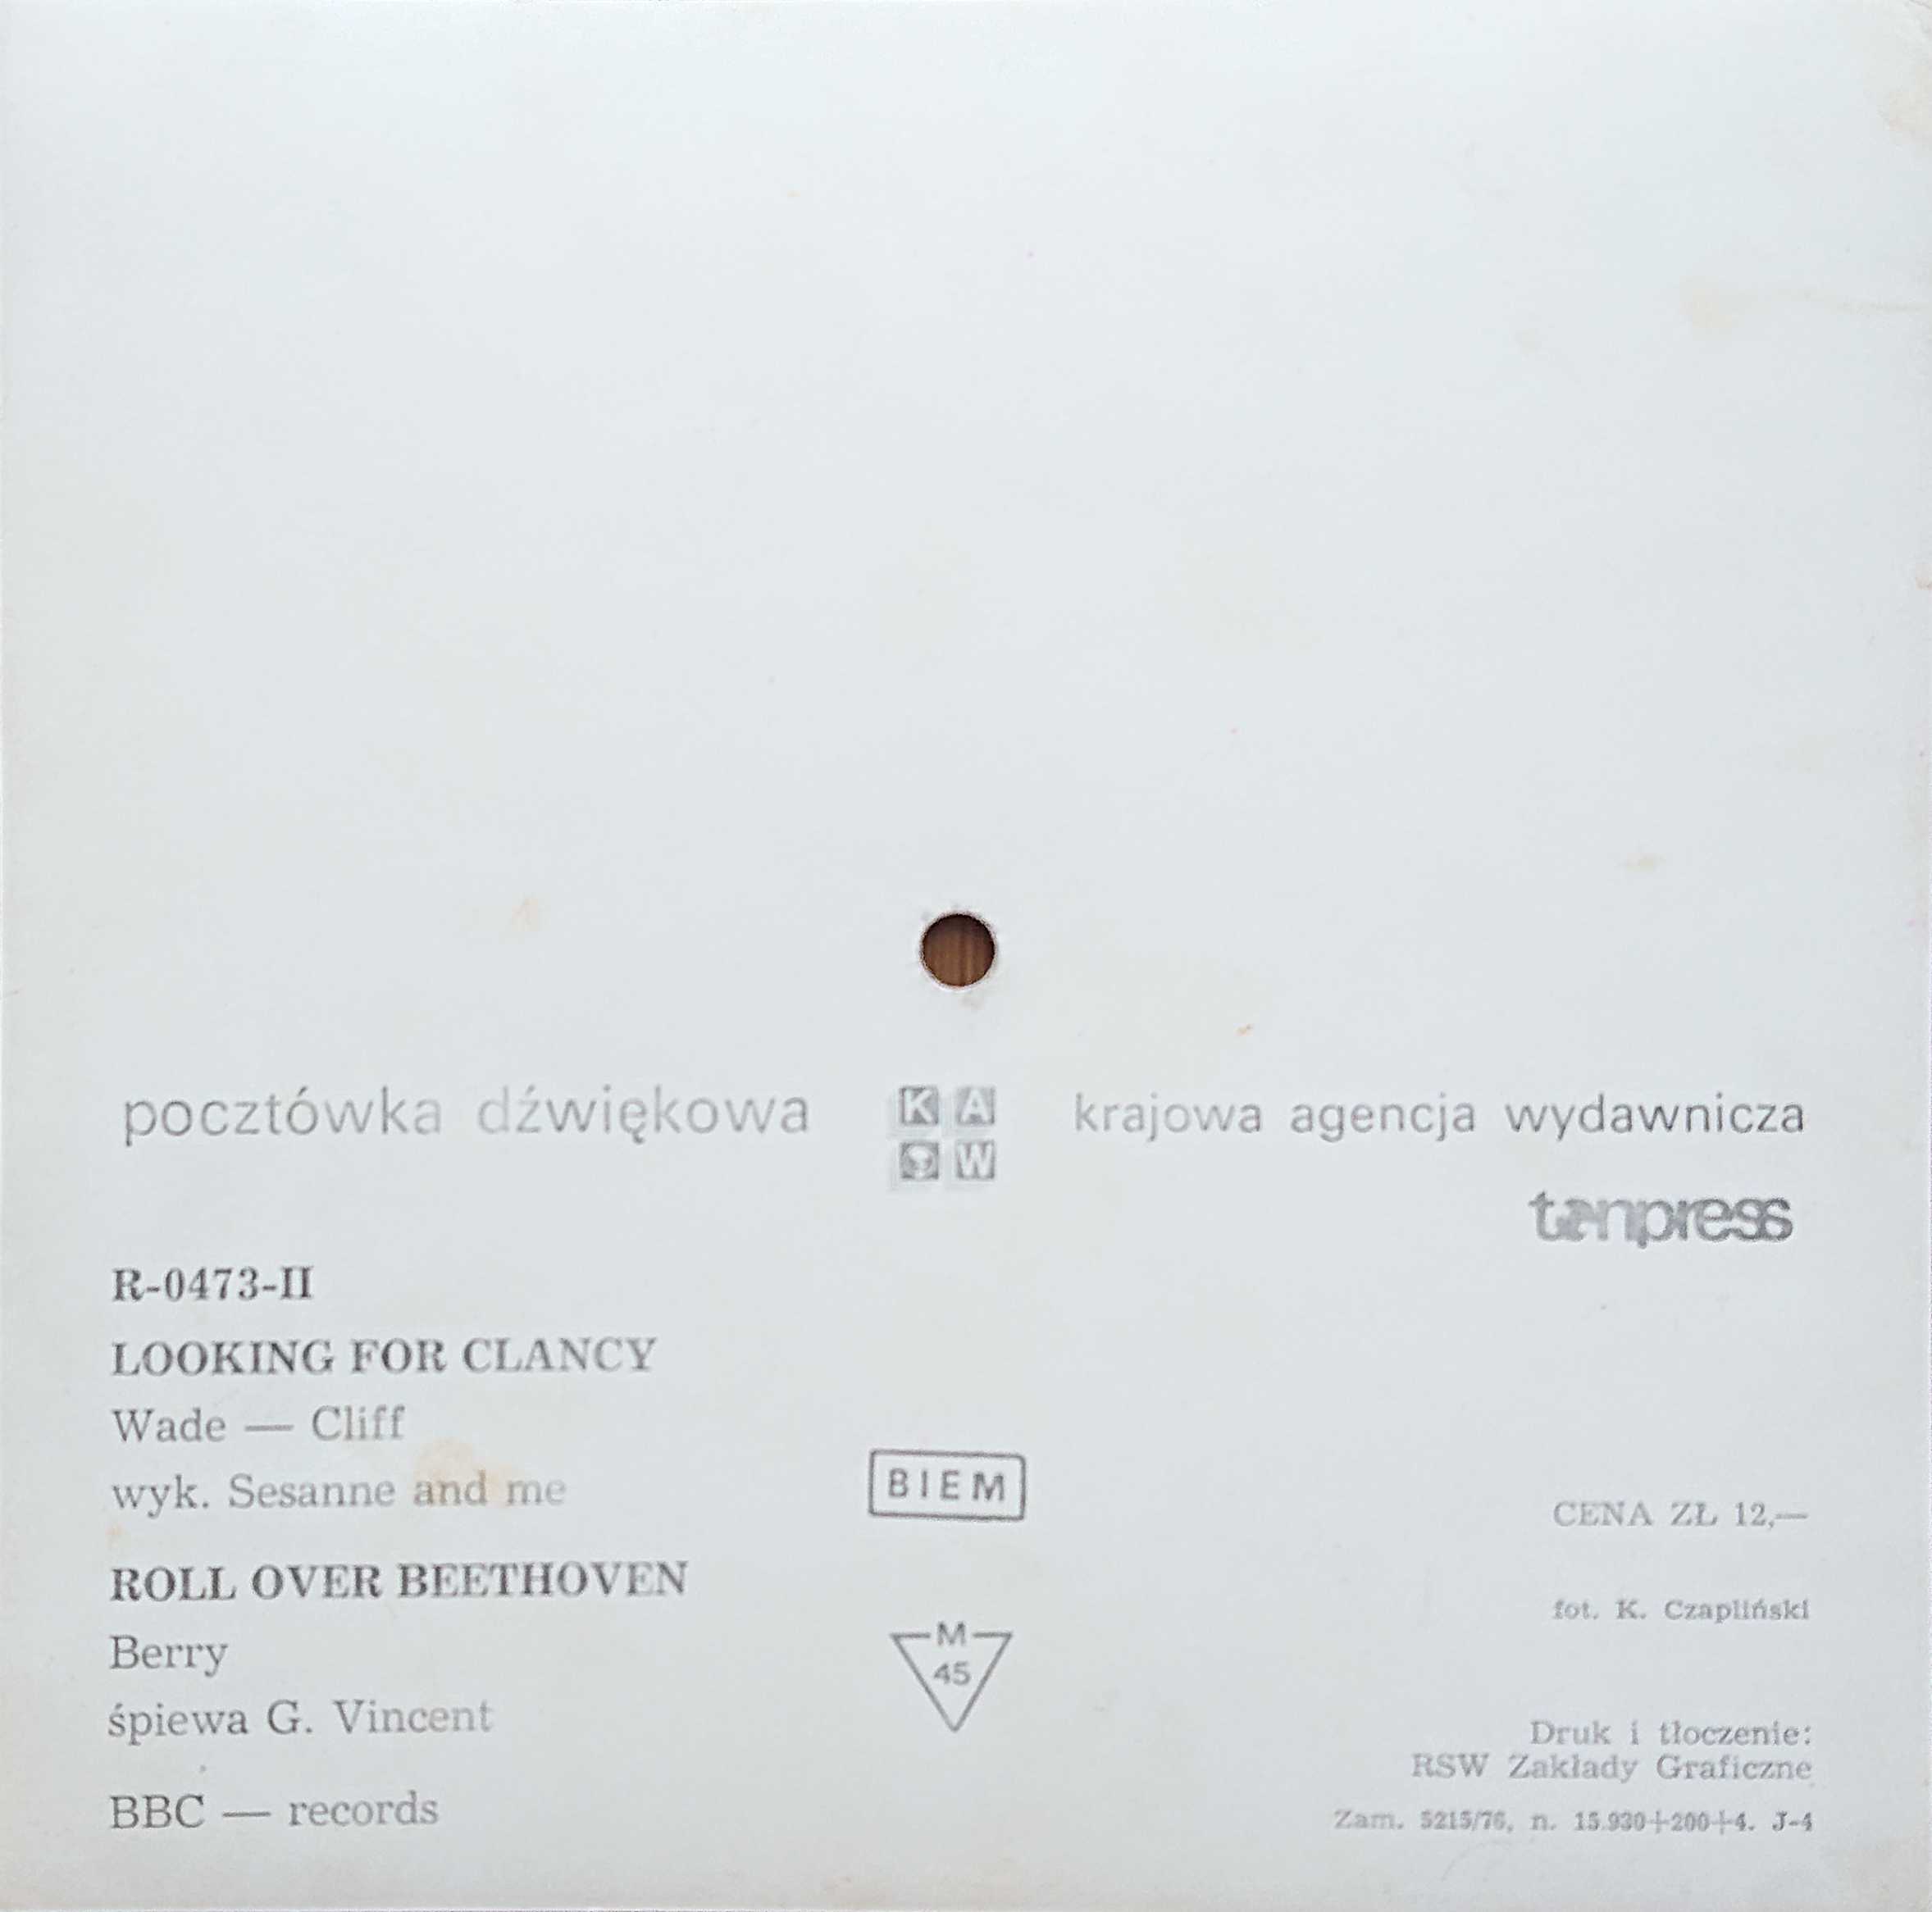 Picture of R-0473-II Looking for Clancy by artist Wade / Cliff from the BBC records and Tapes library